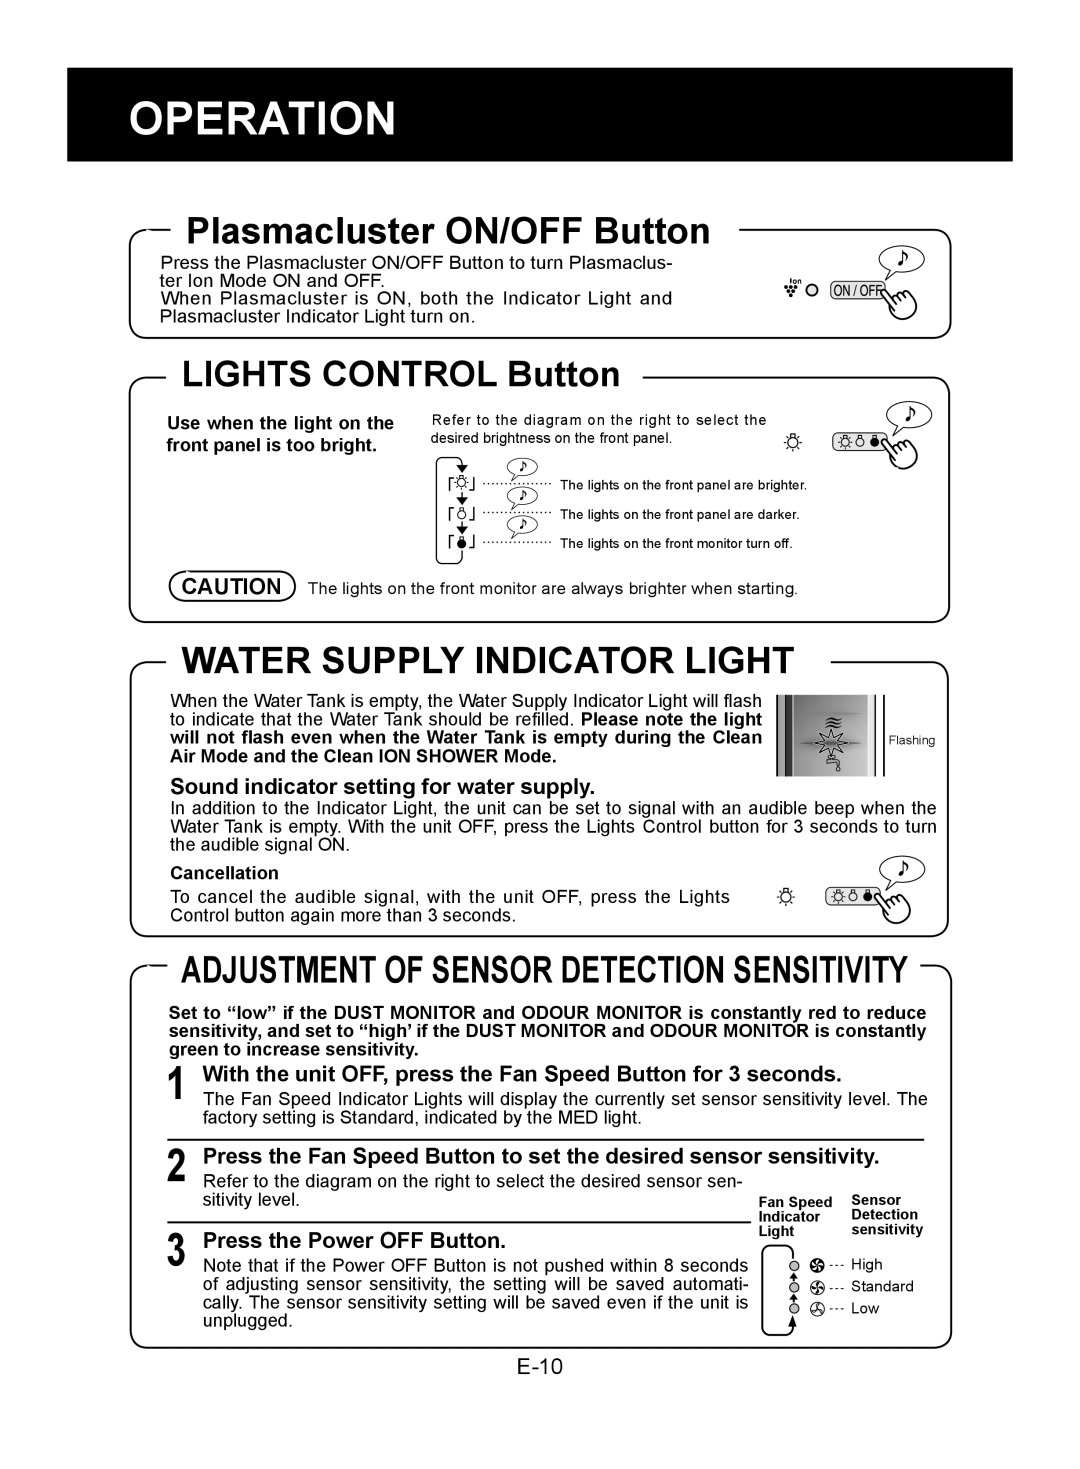 Sharp KC-840E Plasmacluster ON/OFF Button, Water Supply Indicator Light, LIGHTS CONTROL Button, Operation, Cancellation 